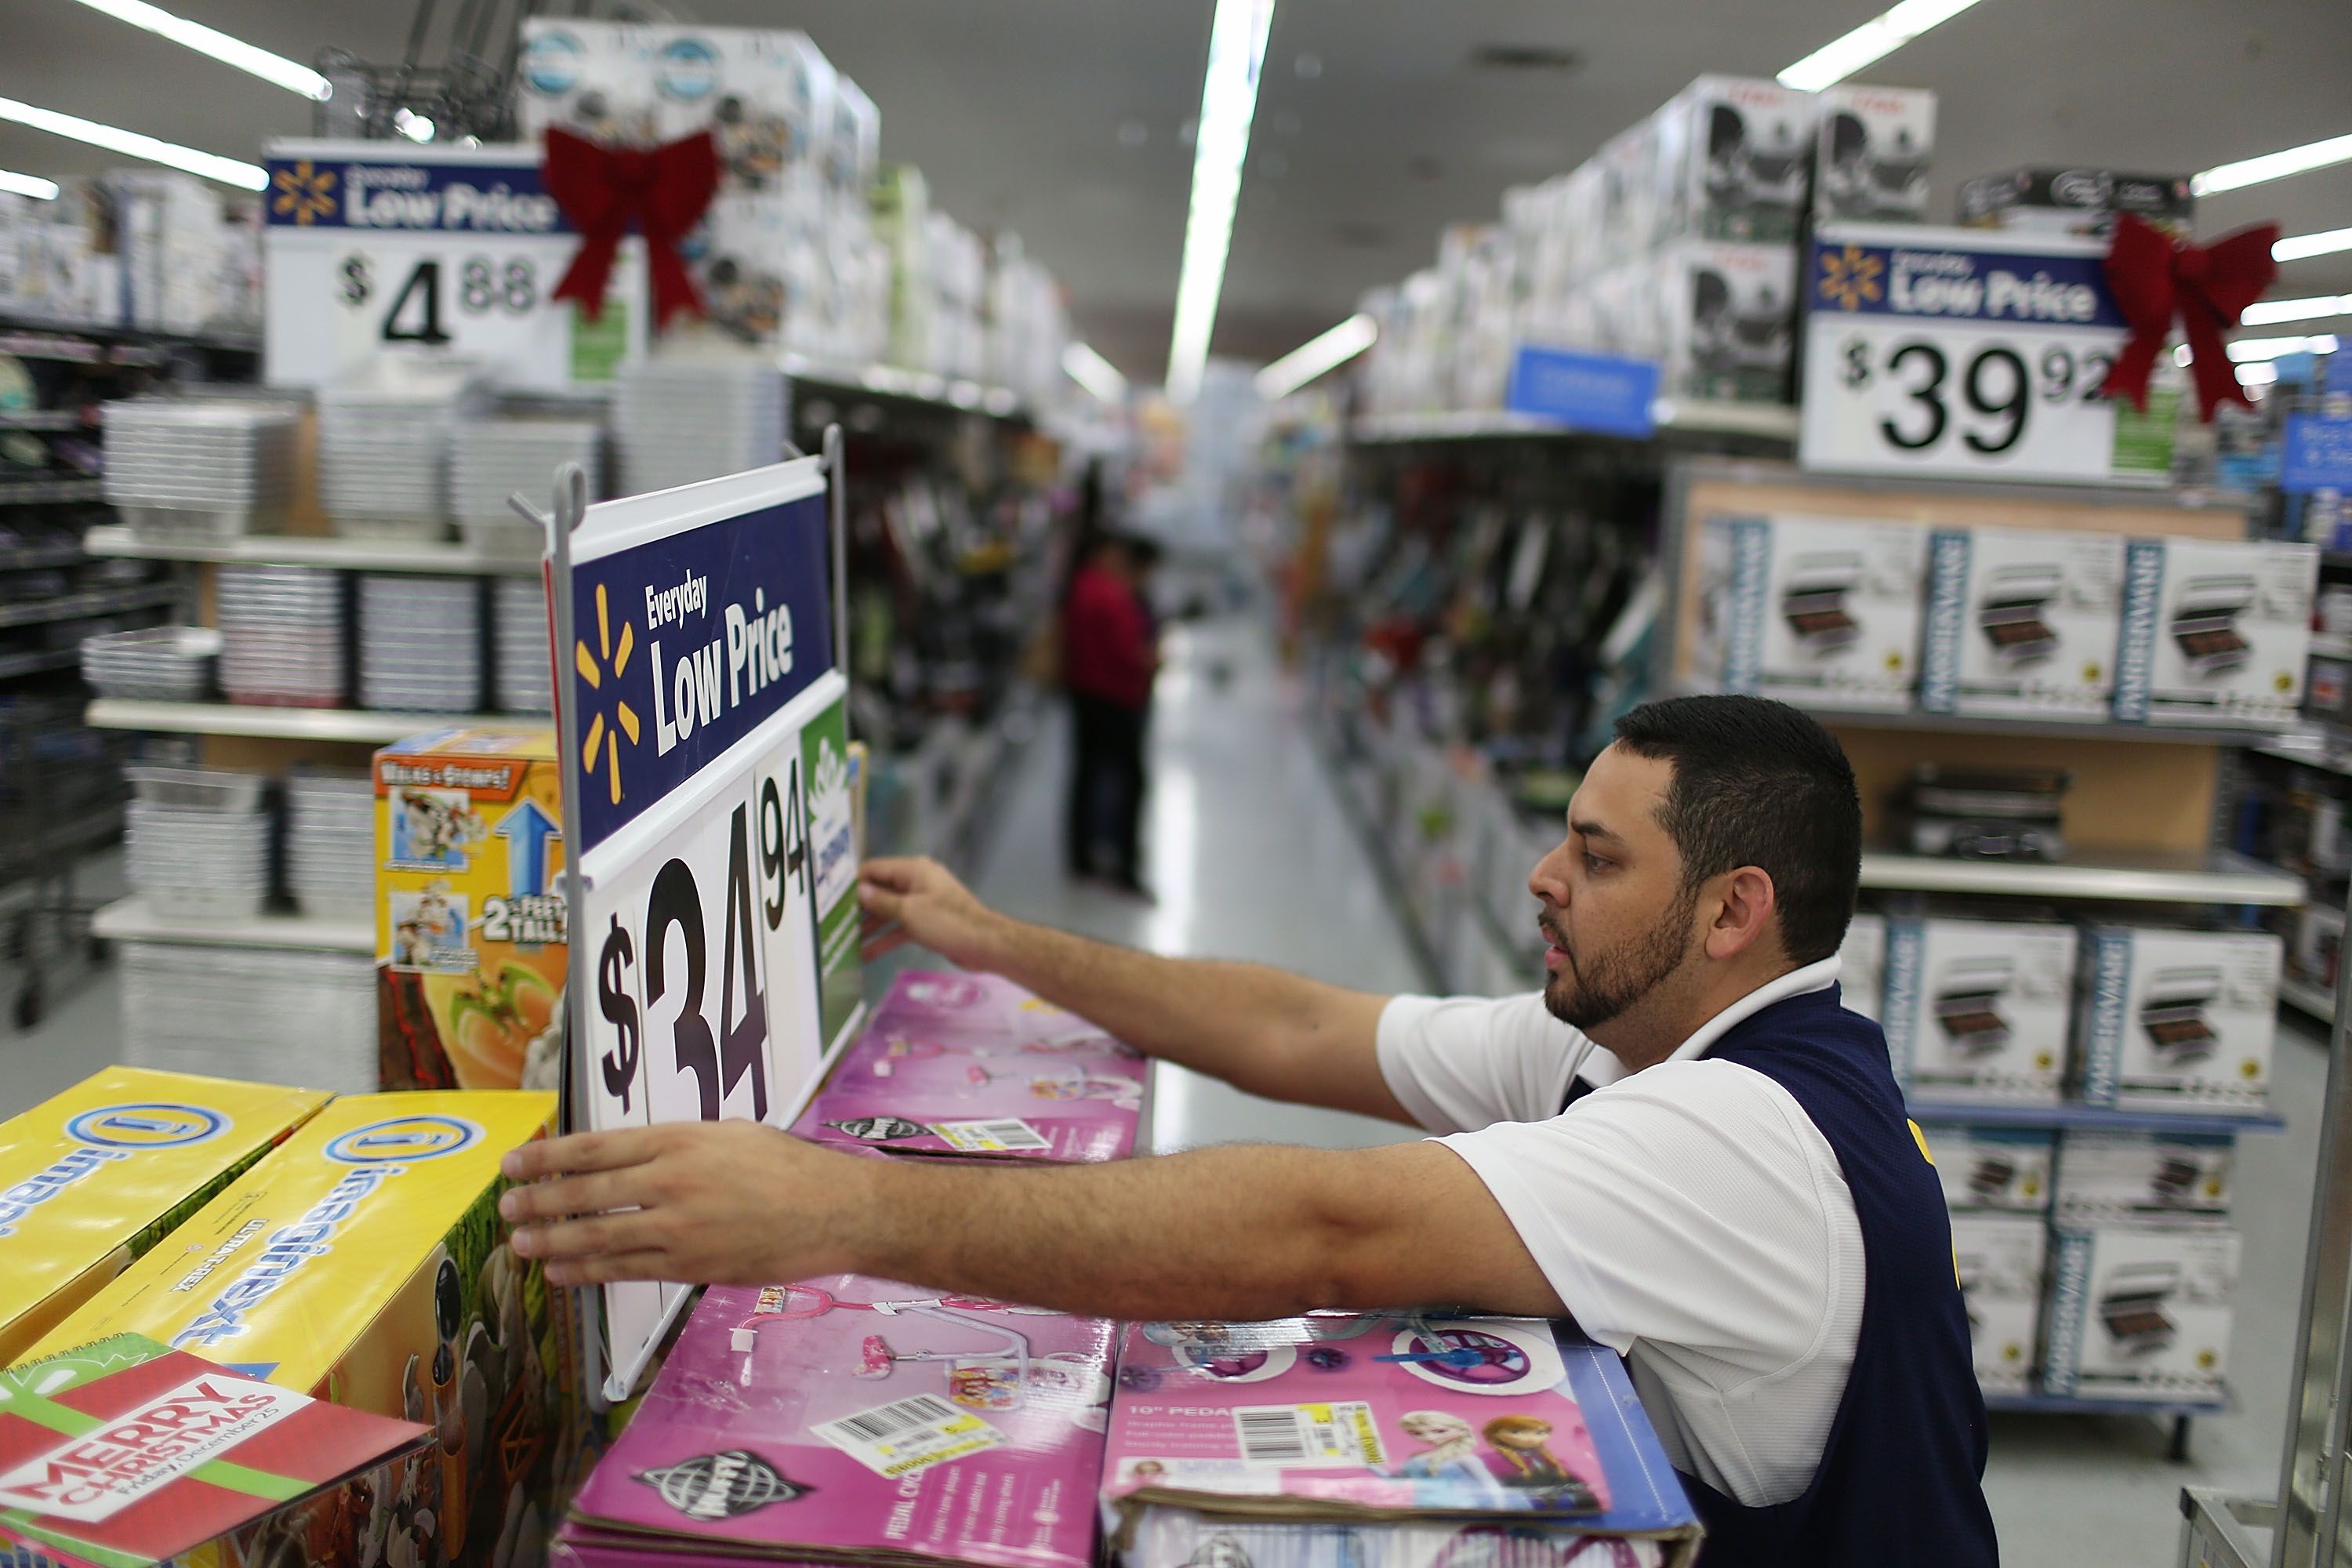 12 Things You Might Not Know About Working at Walmart